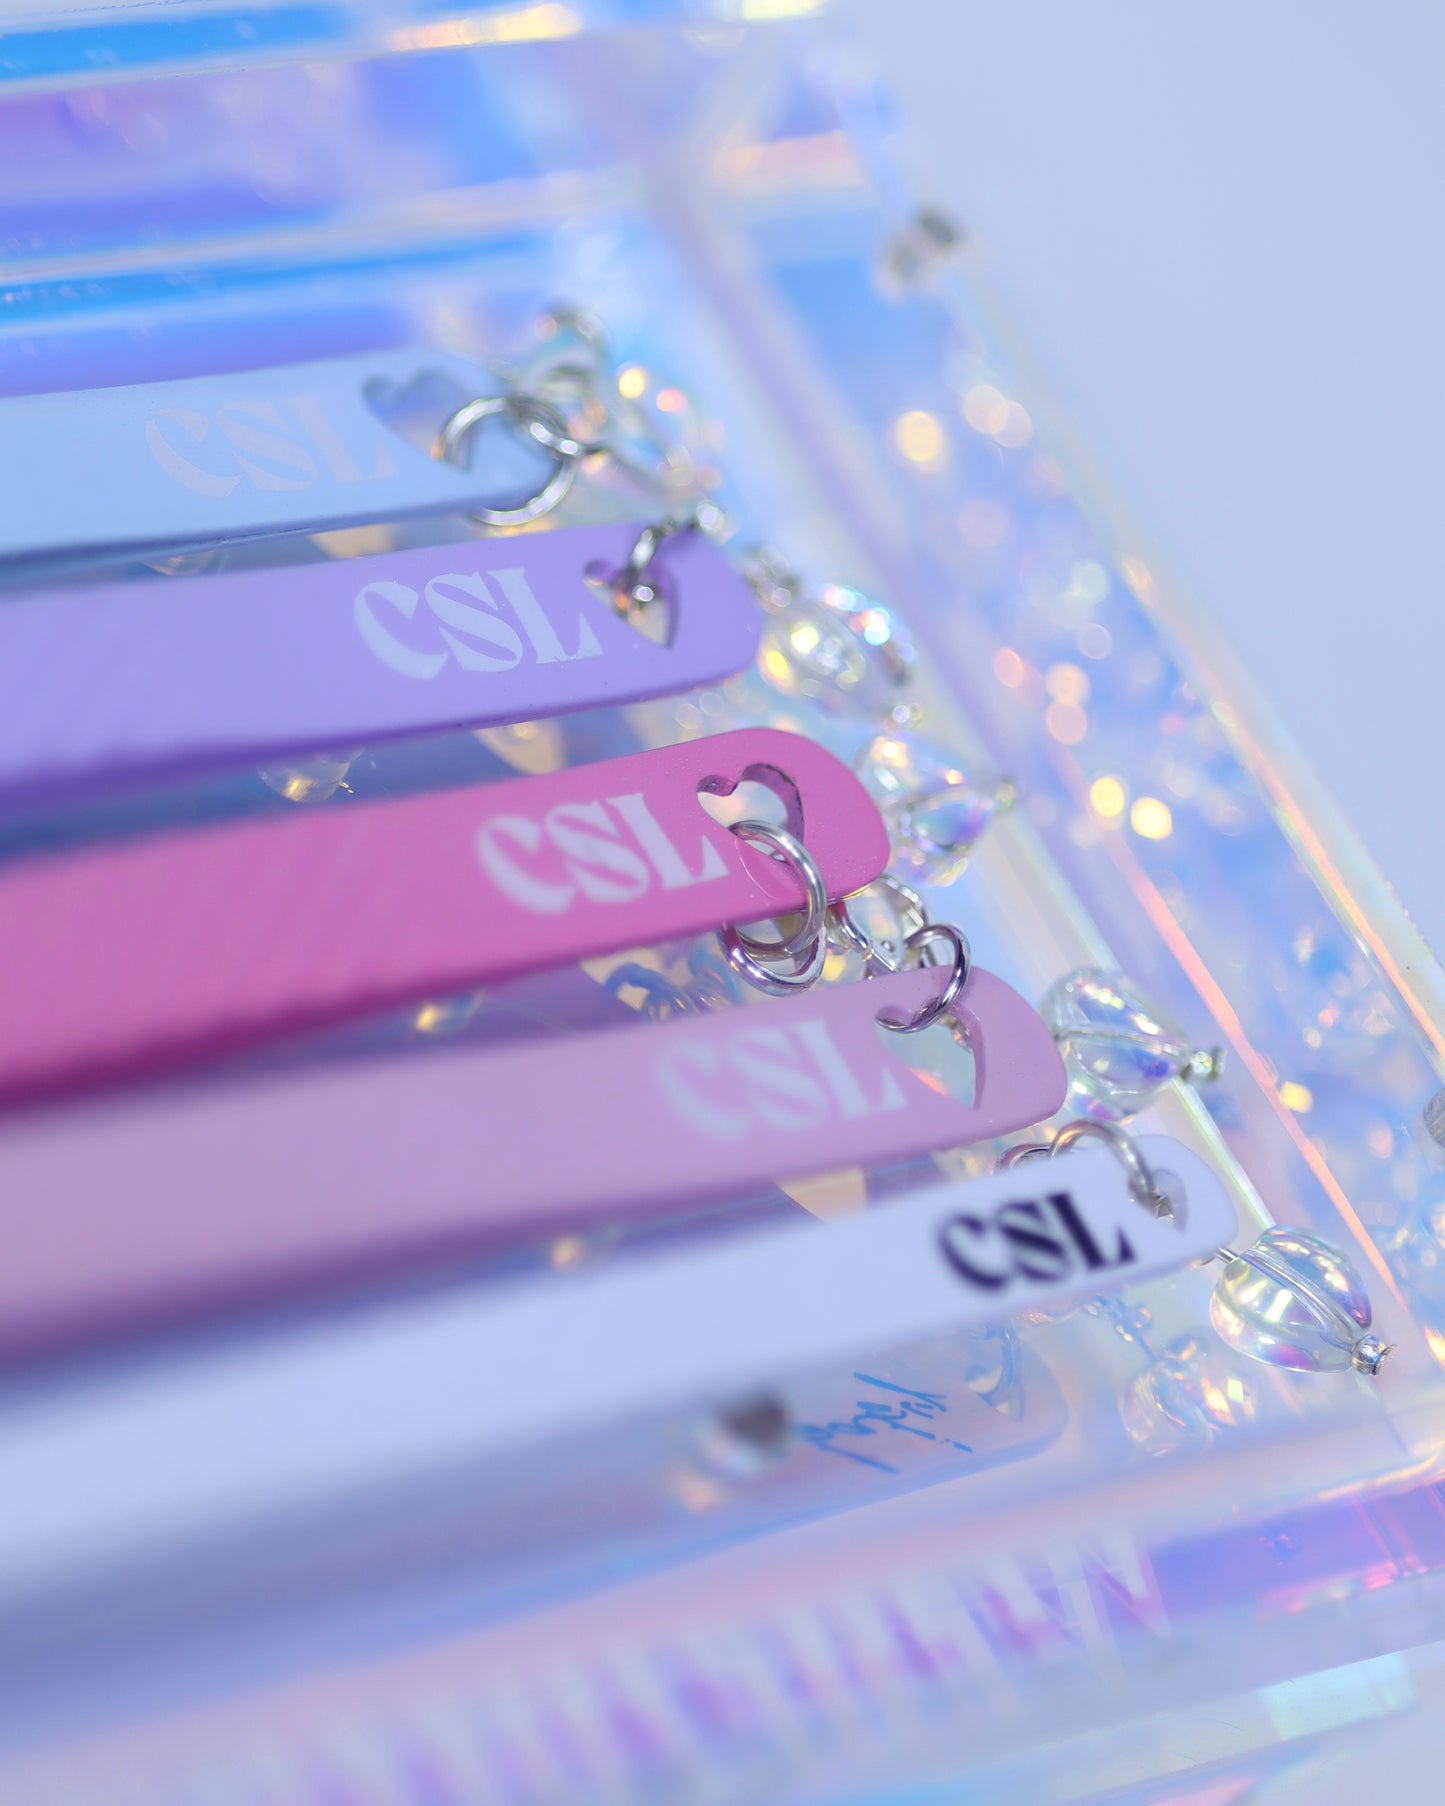 The Mami Chula Tweezer Collection